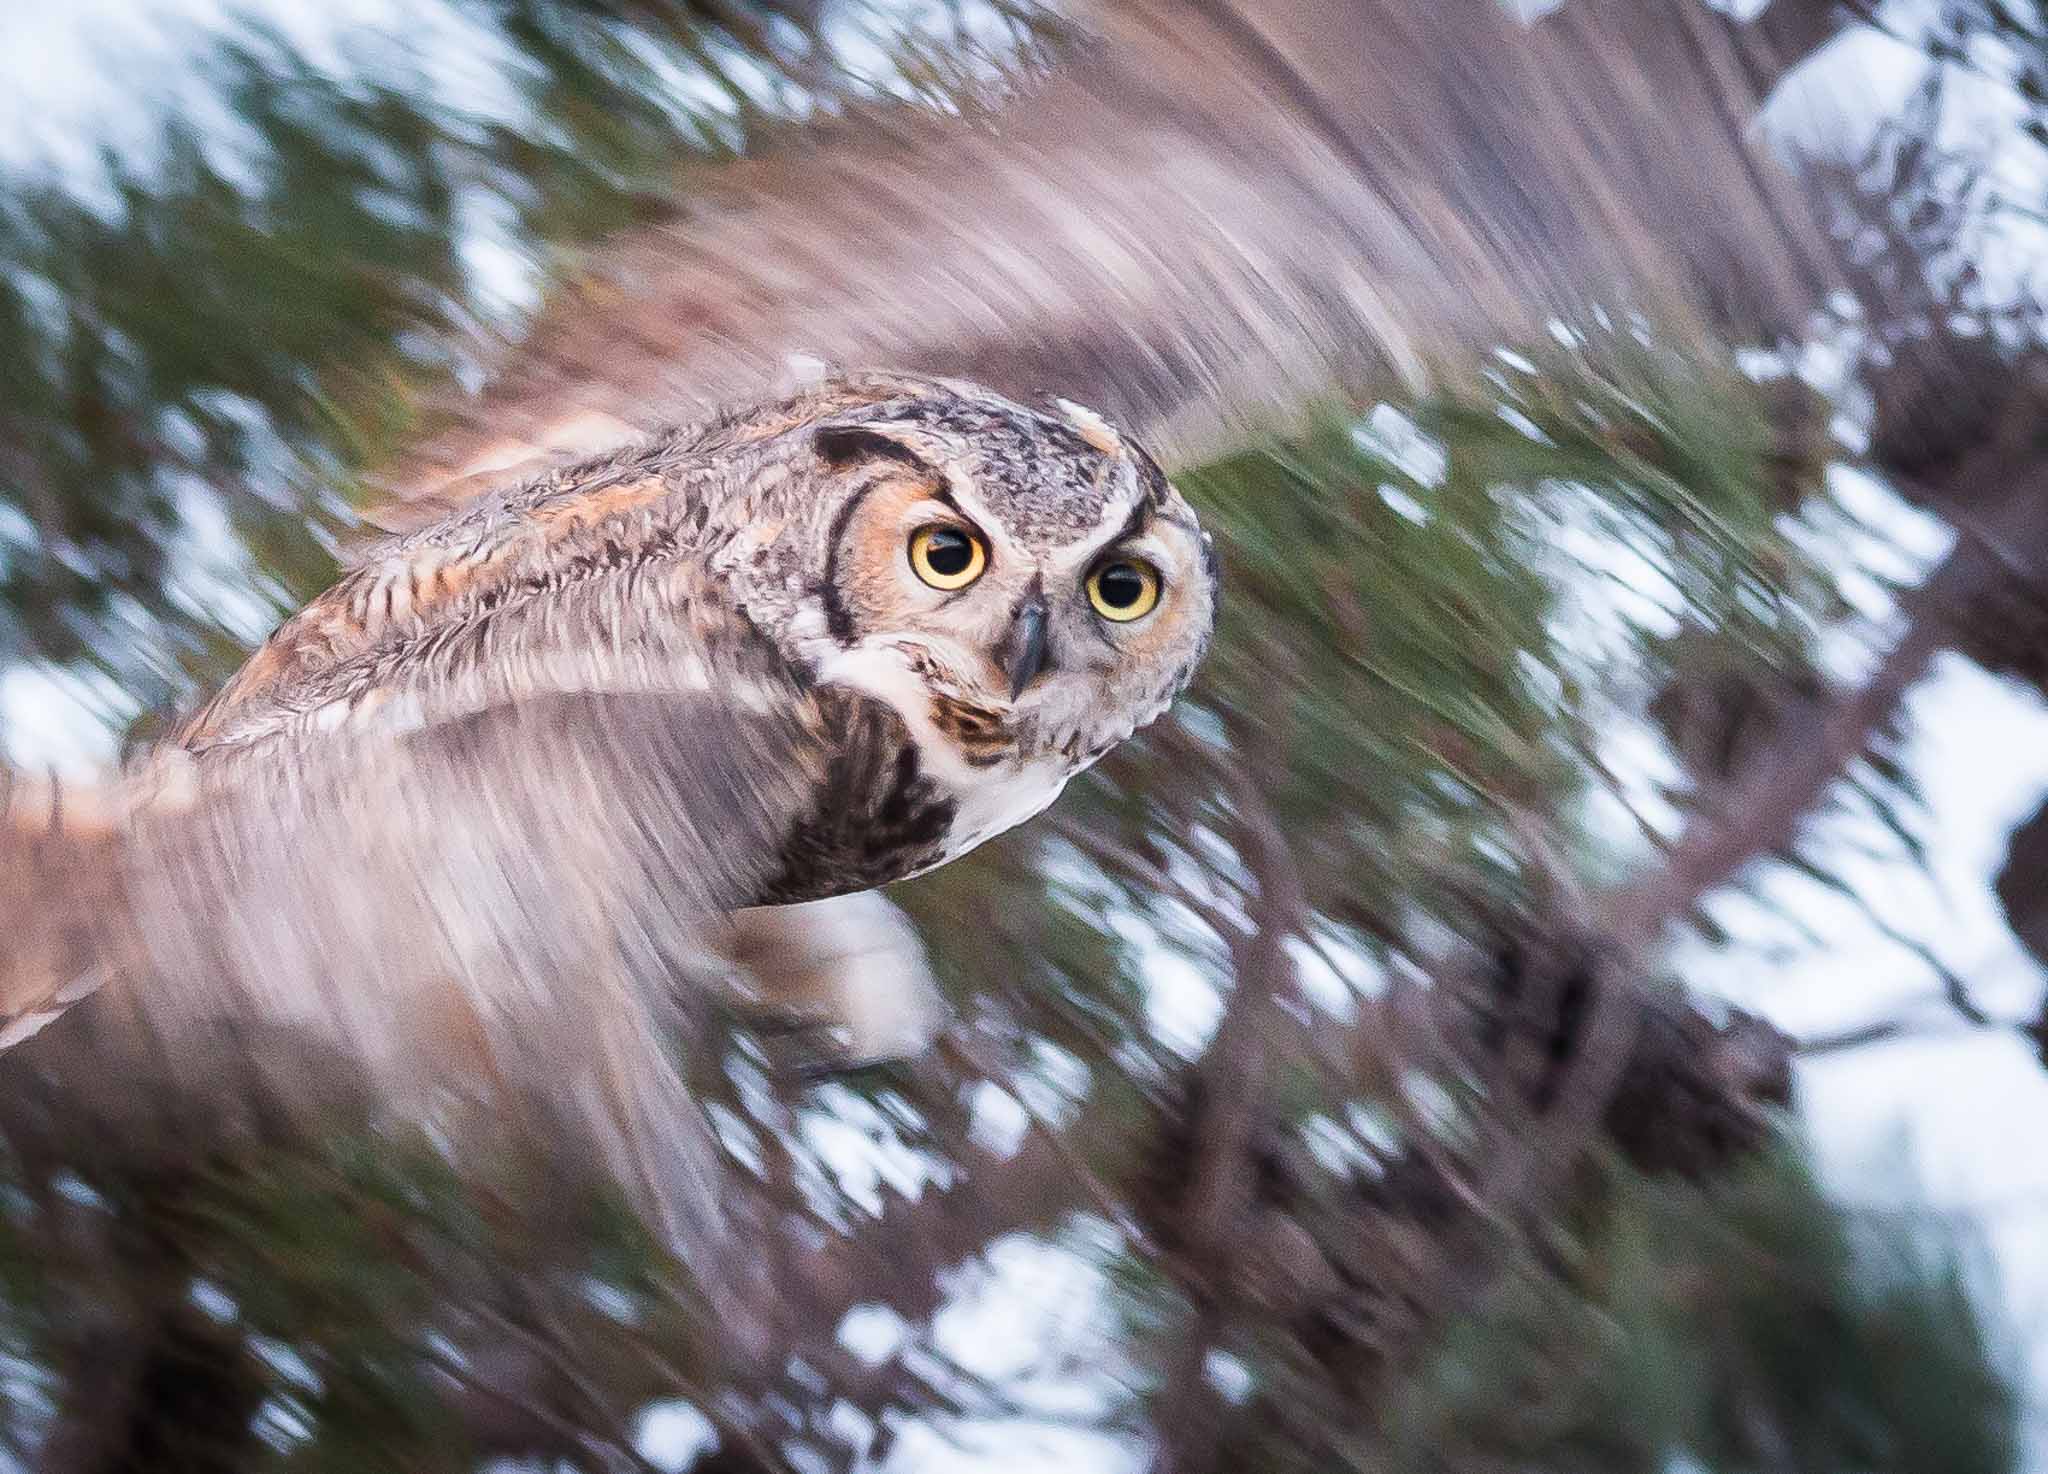 Great Horned Owl leaving the pine at sunset, Pancho Villa State Park, Columbus NM, February 26, 2015